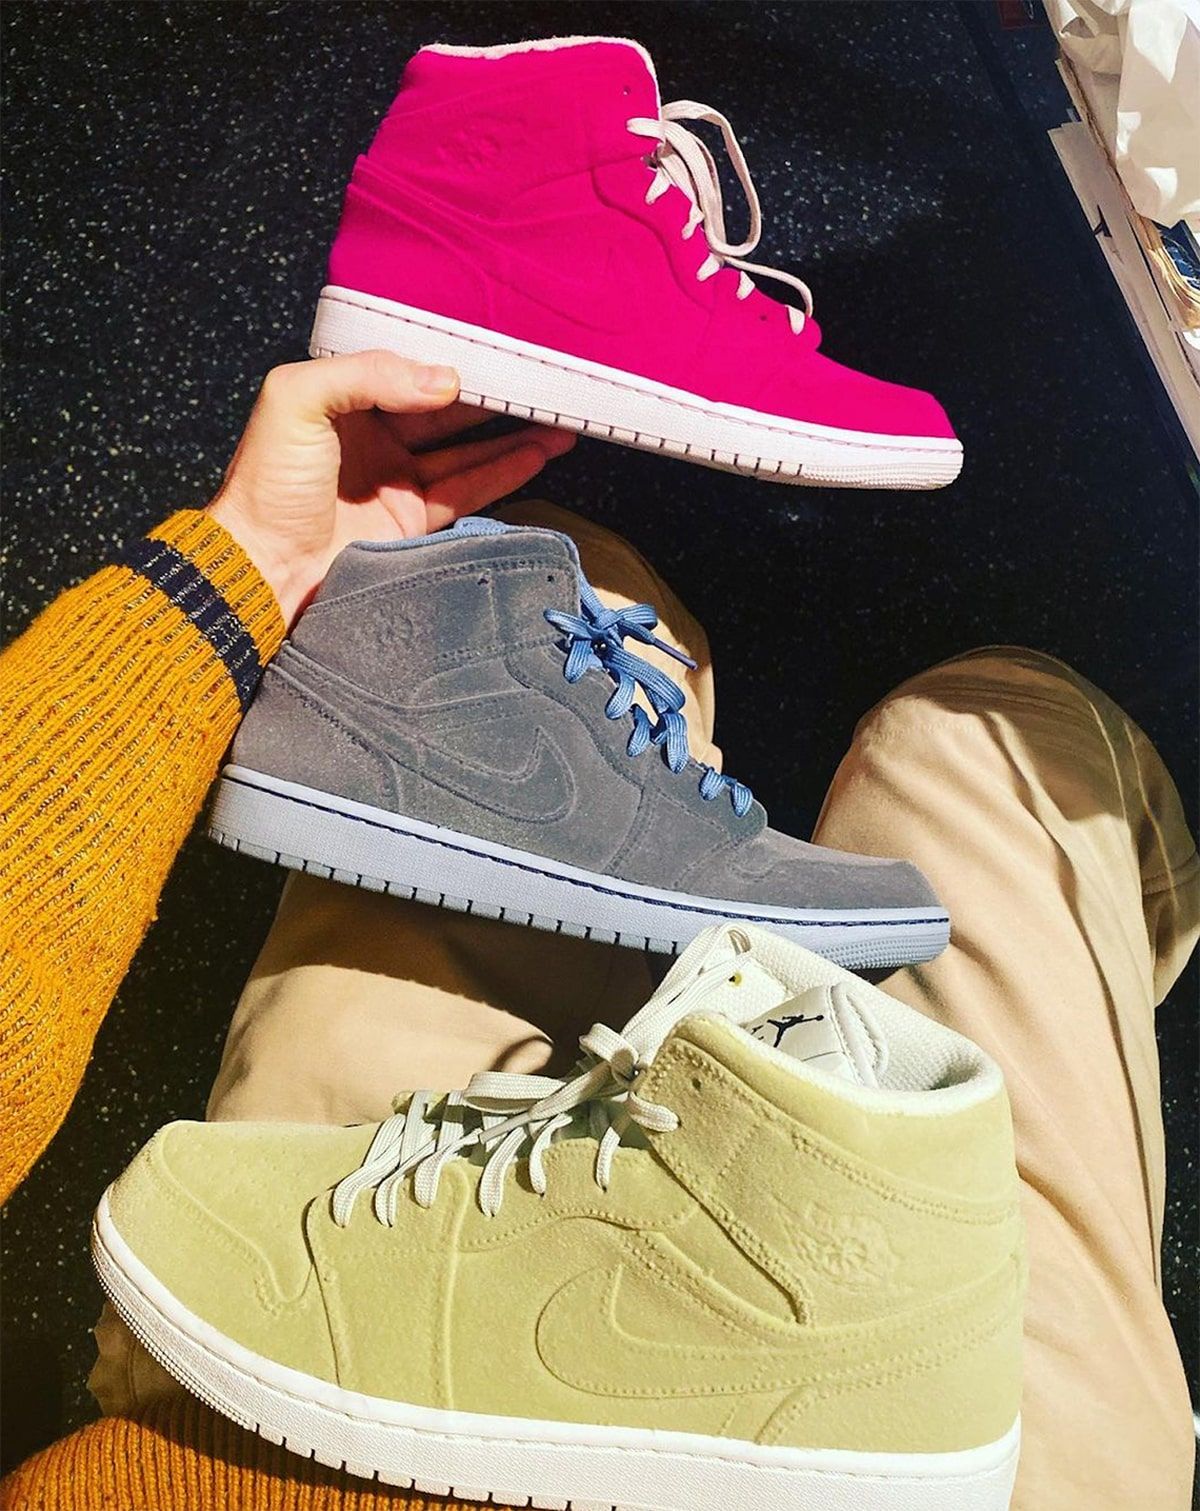 Pigalle Reveals Collection of Velvet and Suede Air Jordan 1 Mids for FW21 Runway